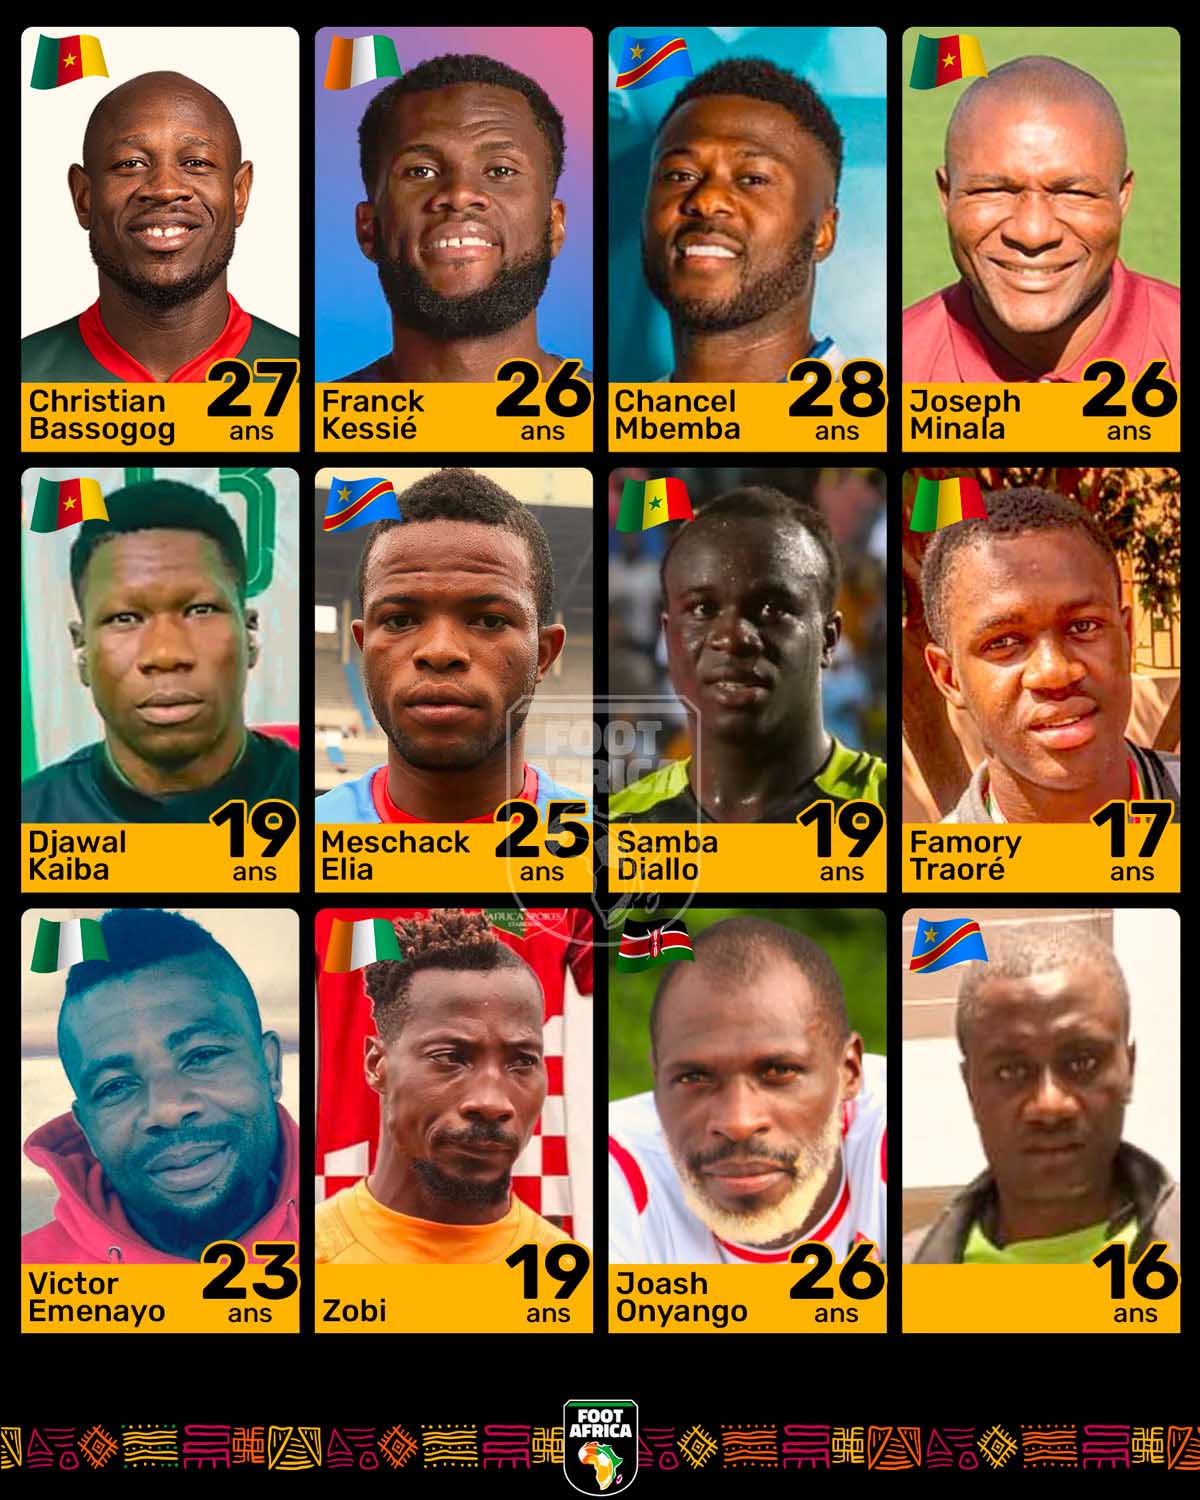 Age joueurs africains